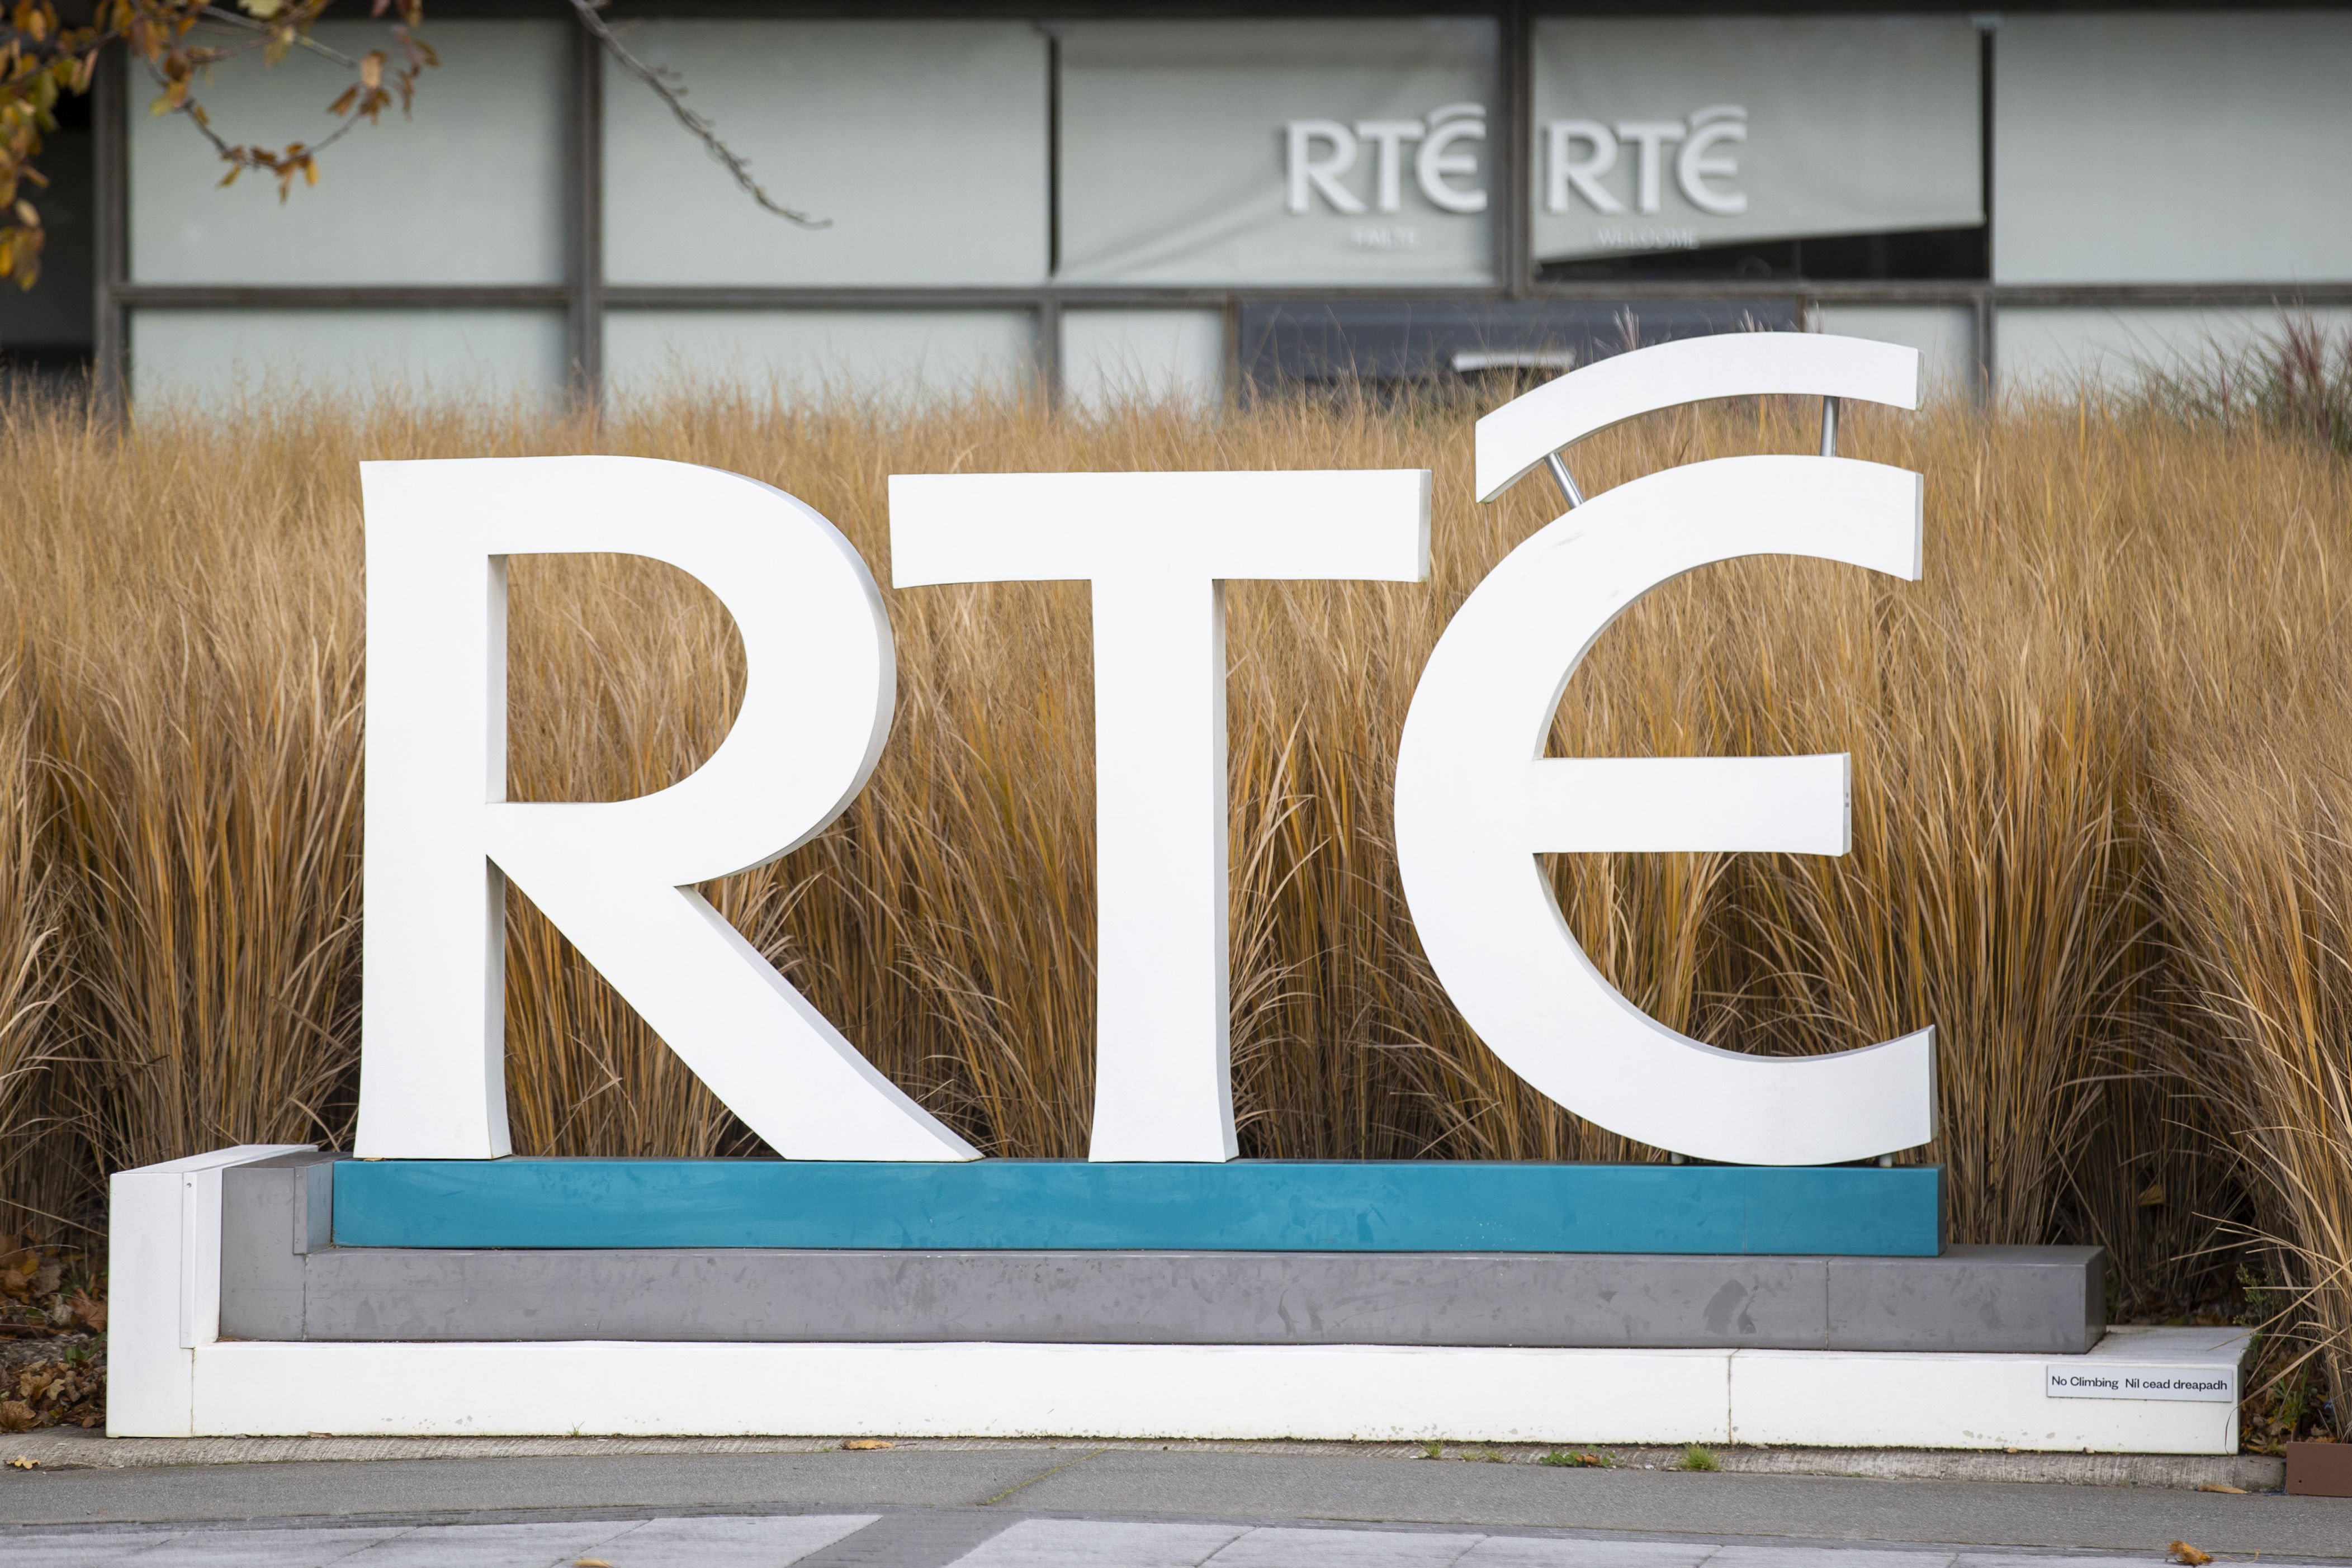 tv licence fee will be here for some time yet, micheal martin says